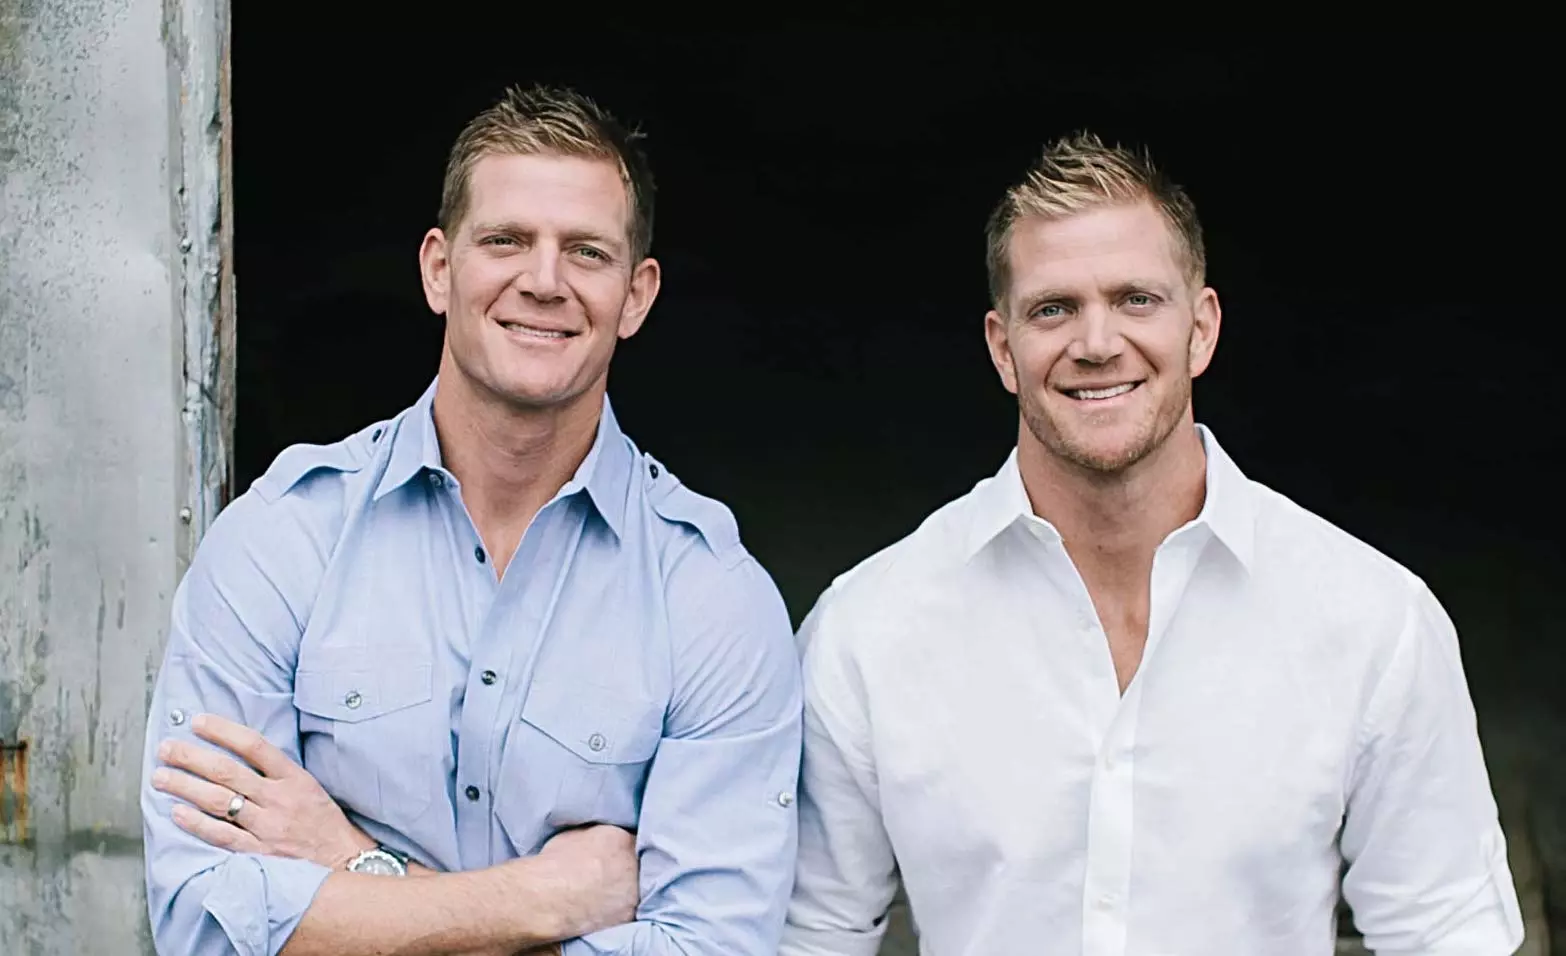 Going to Bat for “Fixer Upper” Hosts, Benham Bros to Keynote Upcoming Pro-Life Conference